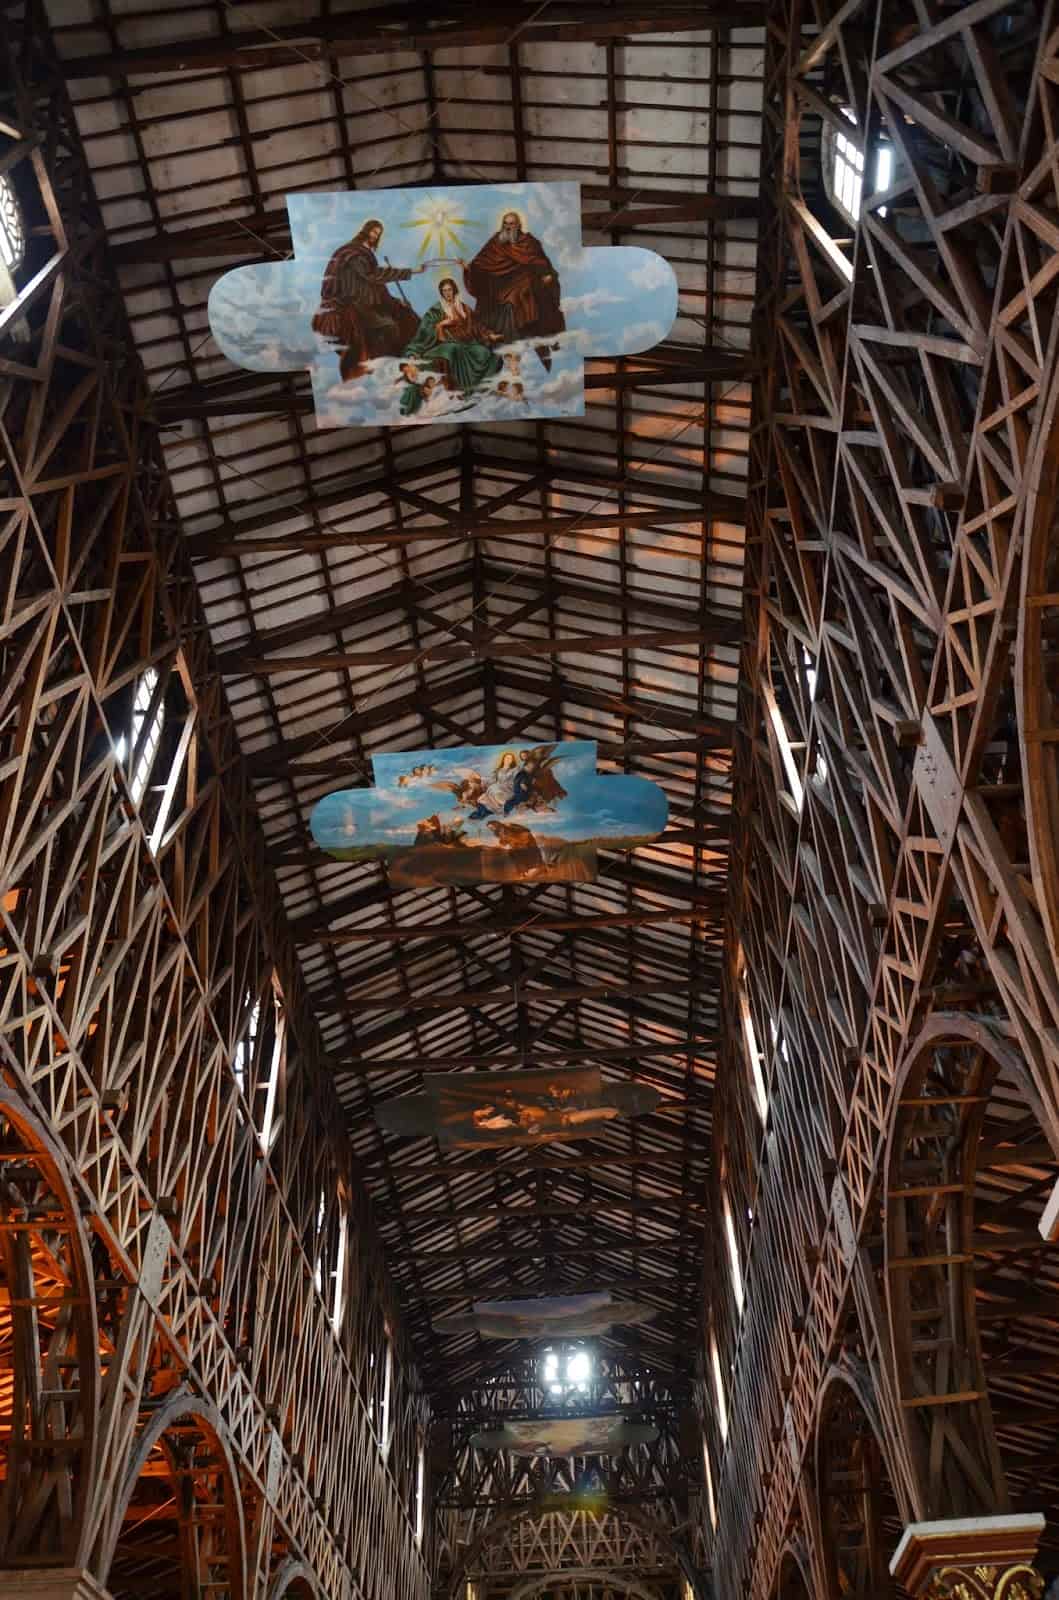 Ceiling of Our Lady of Poverty at Plaza de Bolívar in Pereira, Risaralda, Colombia